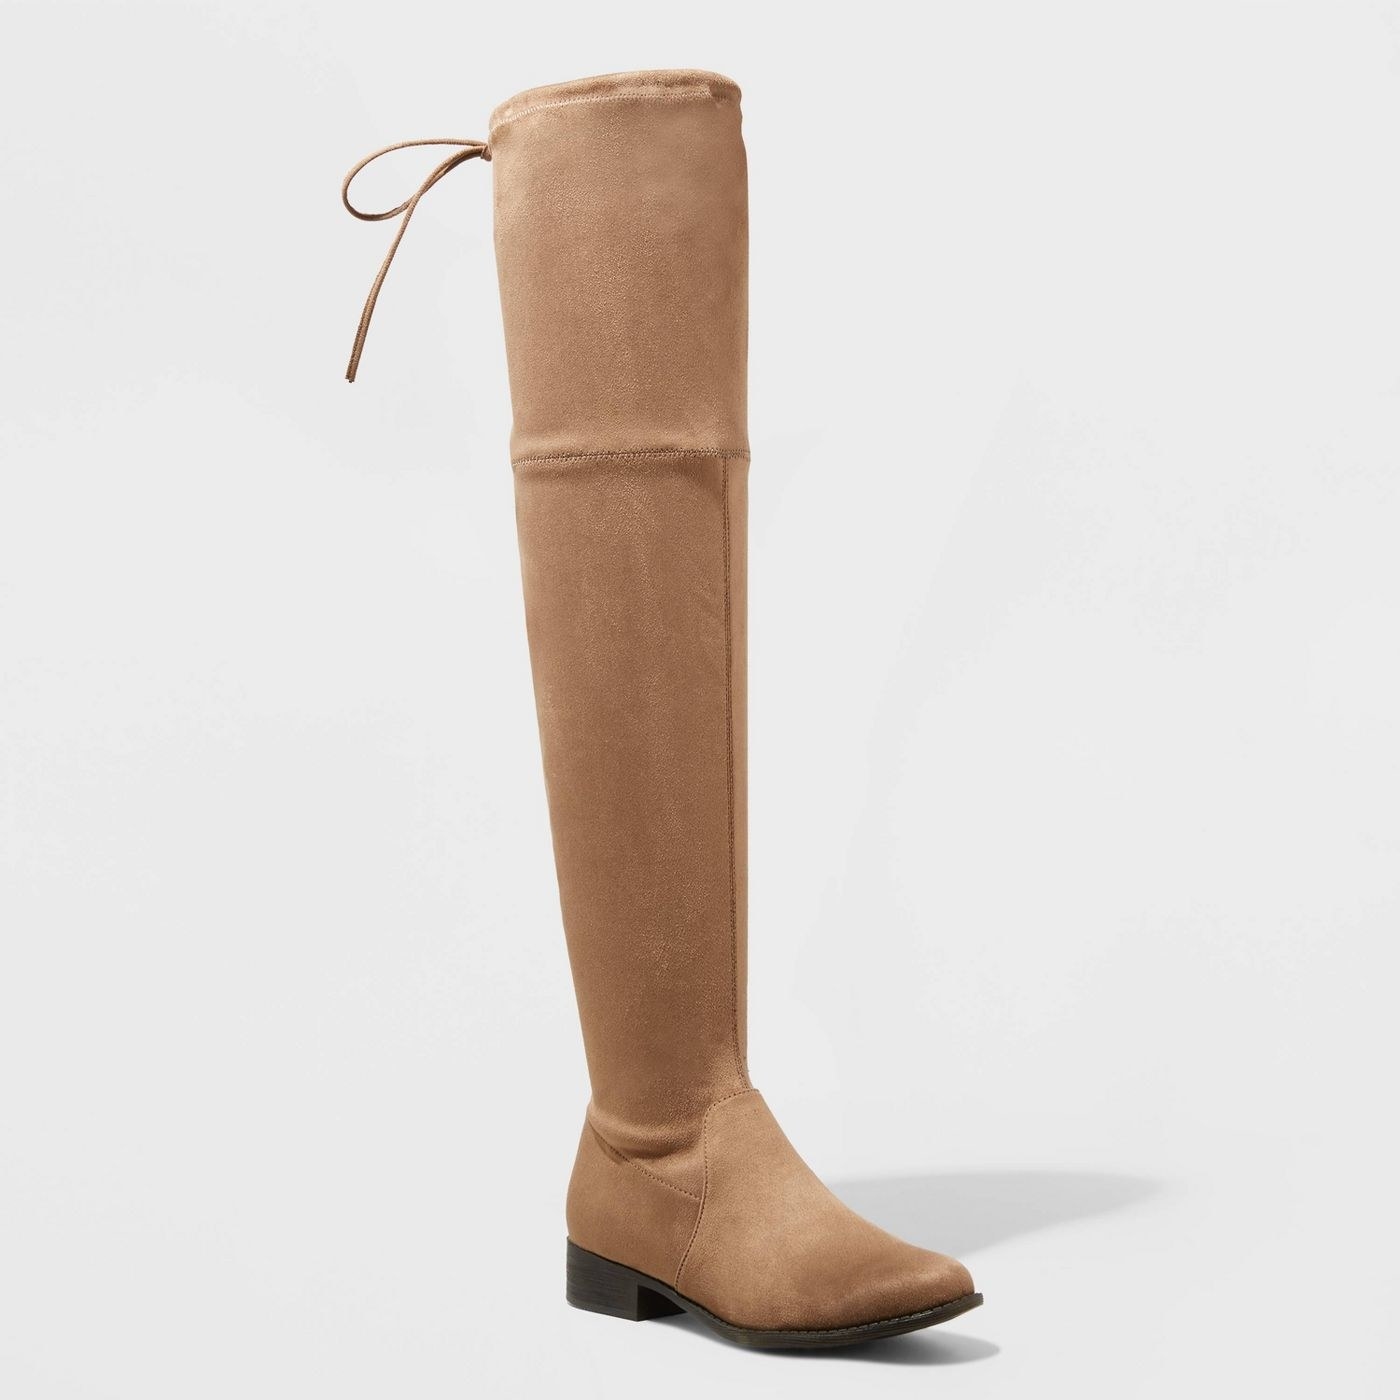 A tan over the knee boot